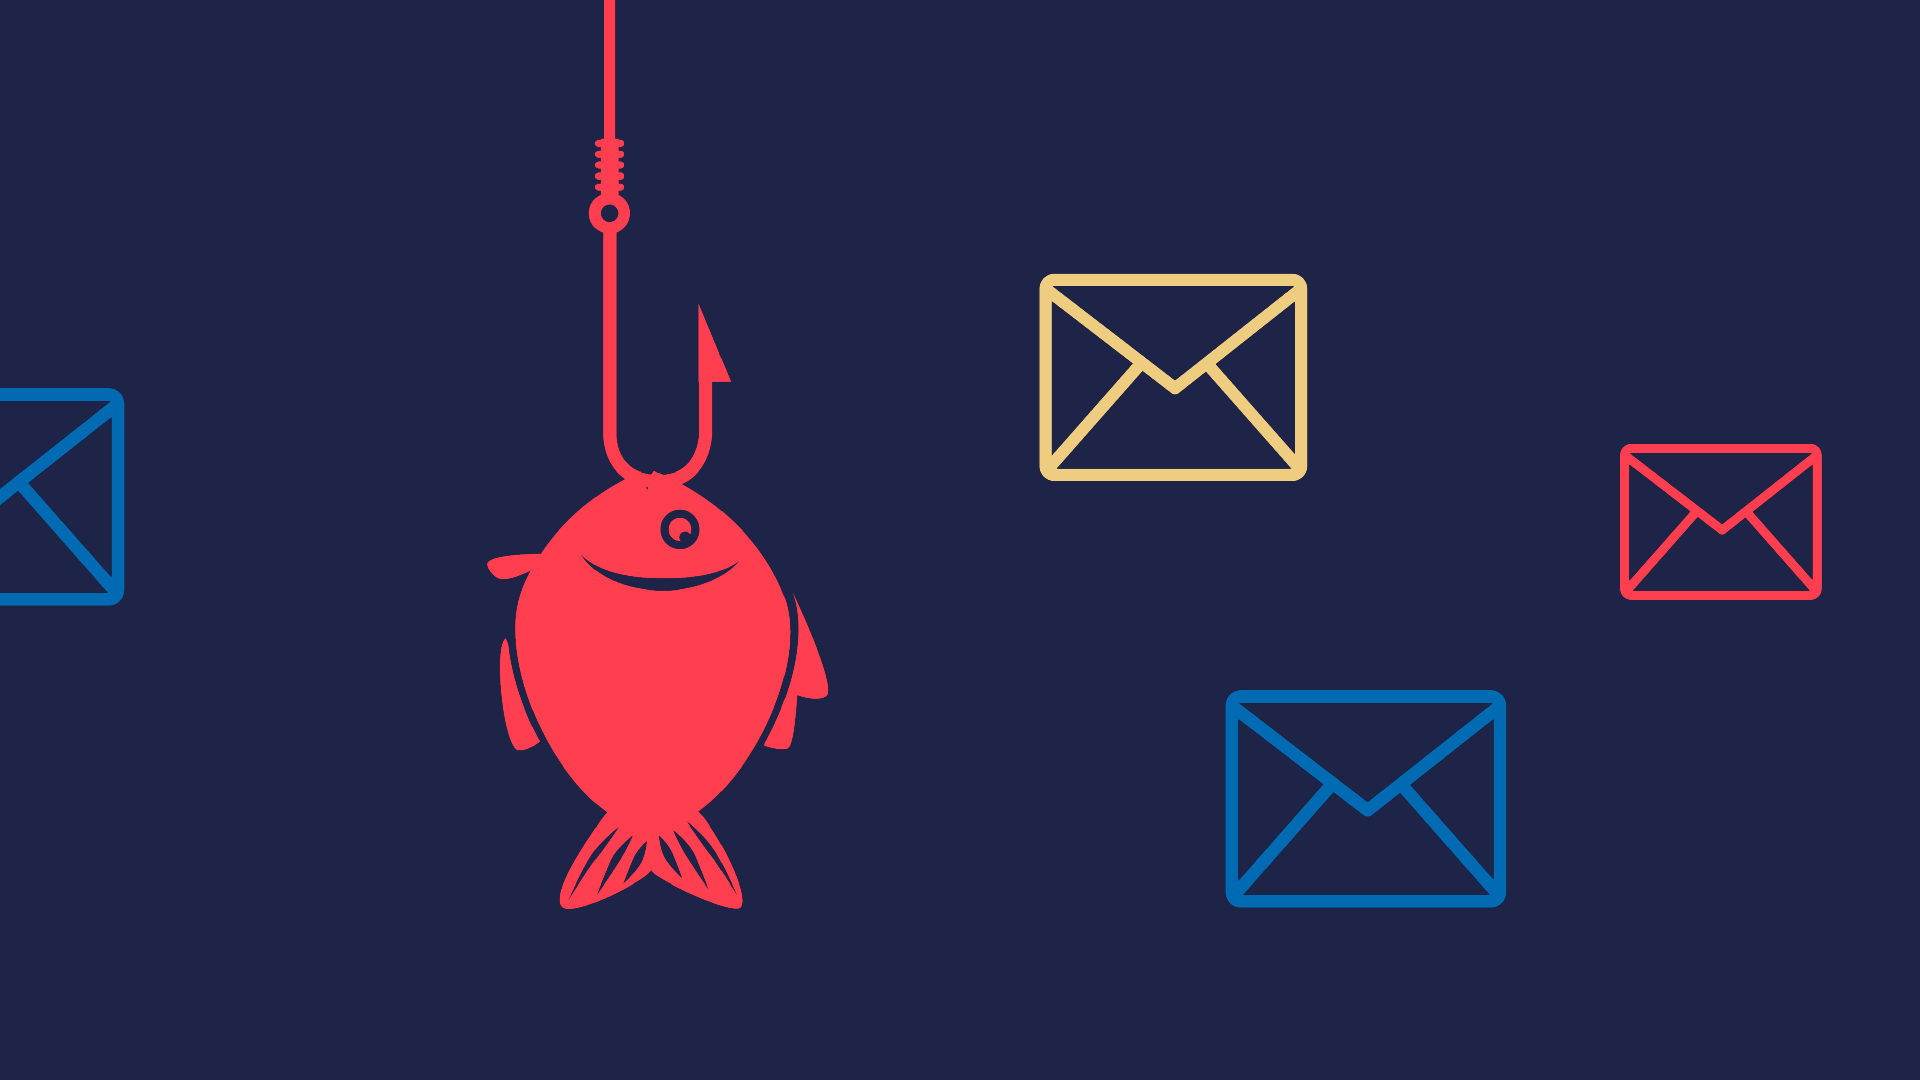 Fish on a fishing rod and envelope graphics